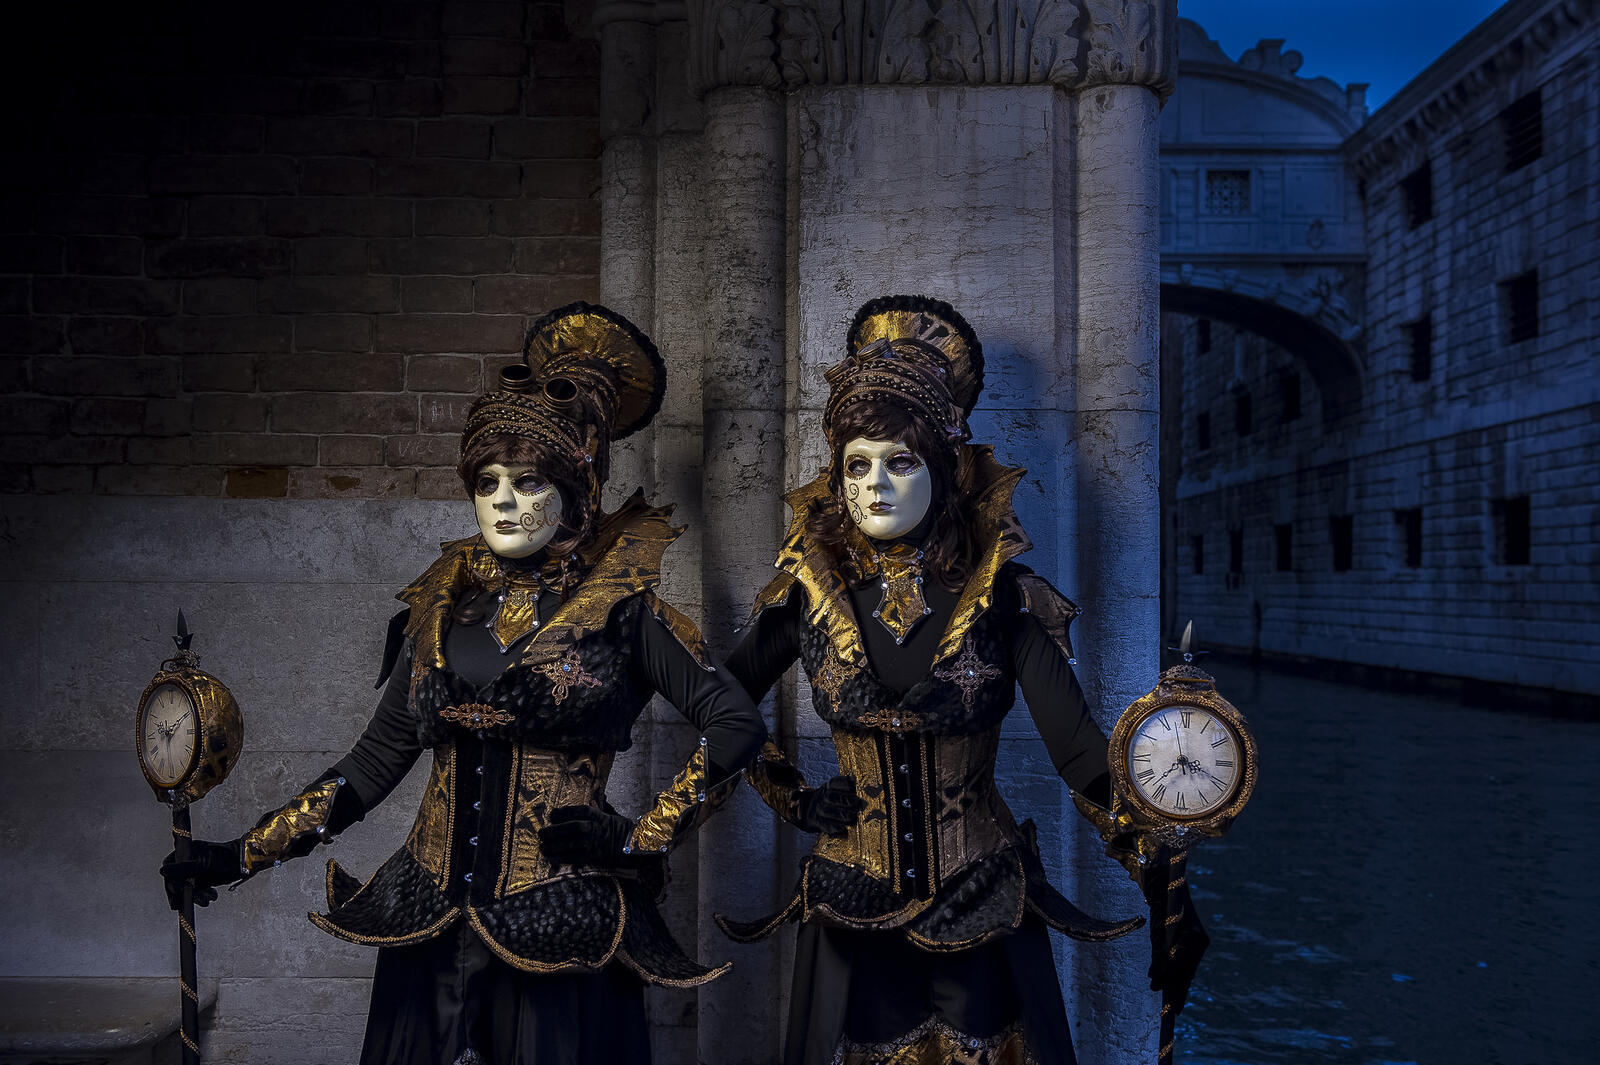 Wallpapers Venetian outfit costumes mask on the desktop